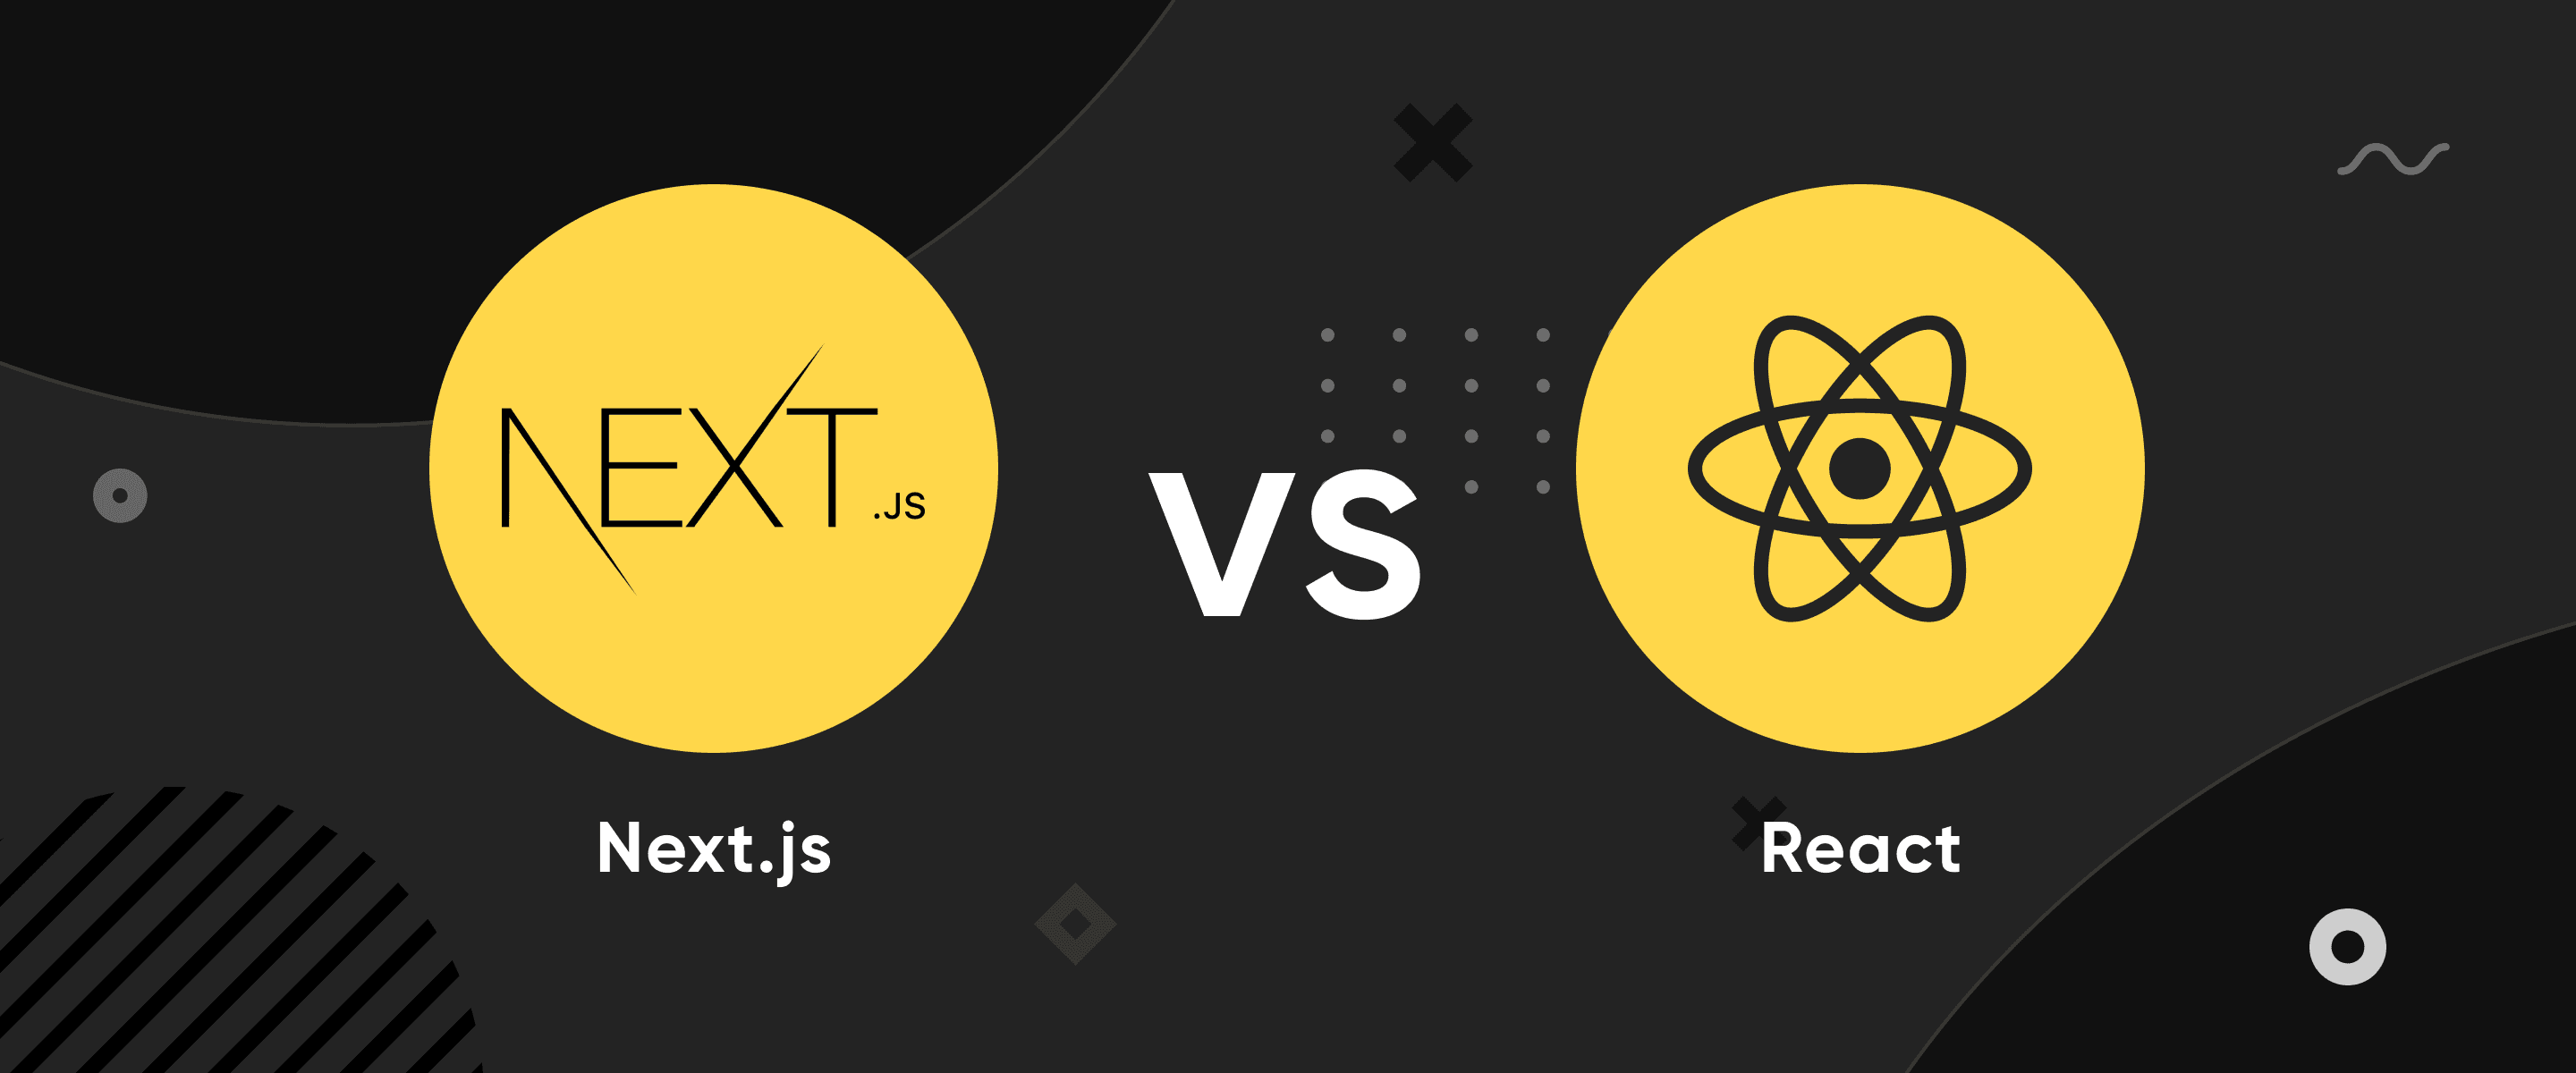 Next.js vs. React: Which One is Better for Front End Development?